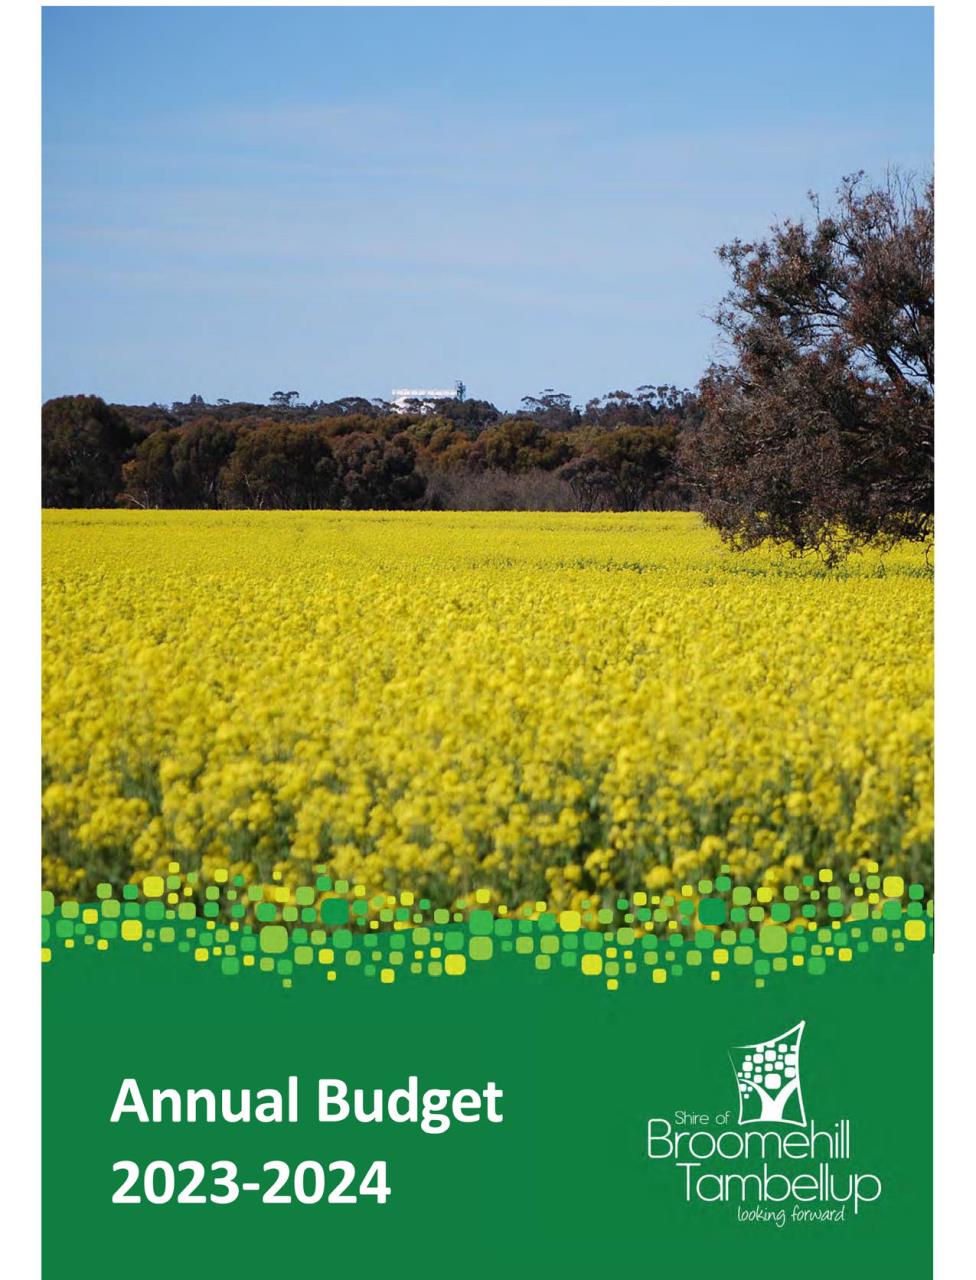 2023/2024 Annual Budget link